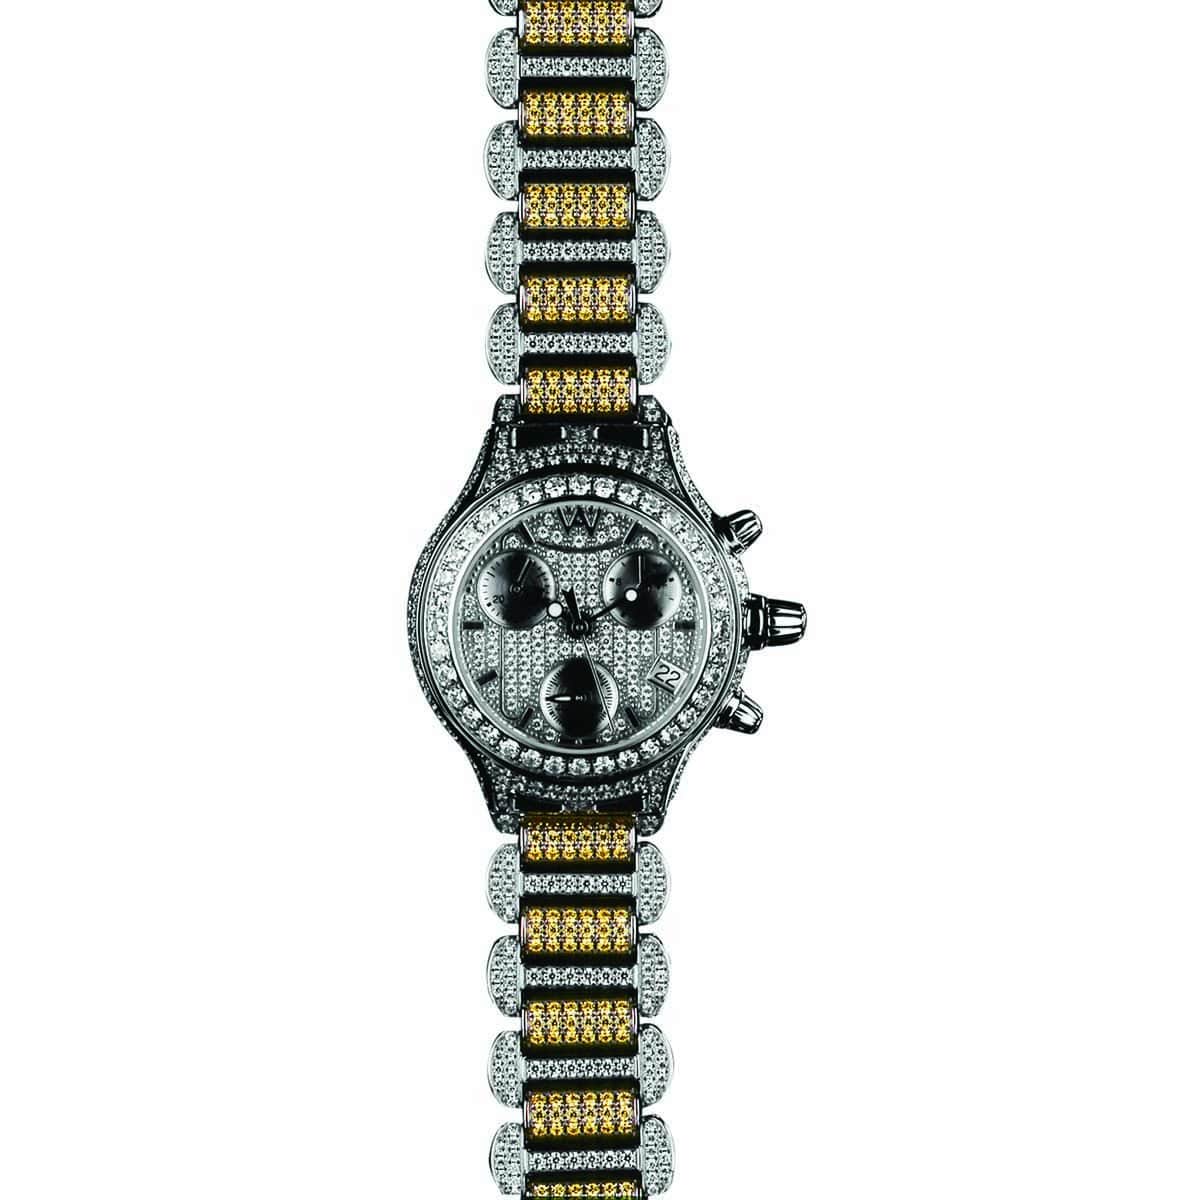 CHRIS AIRE WATCH - PARLAY LADY'S - Chris Aire Fine Jewelry & Timepieces